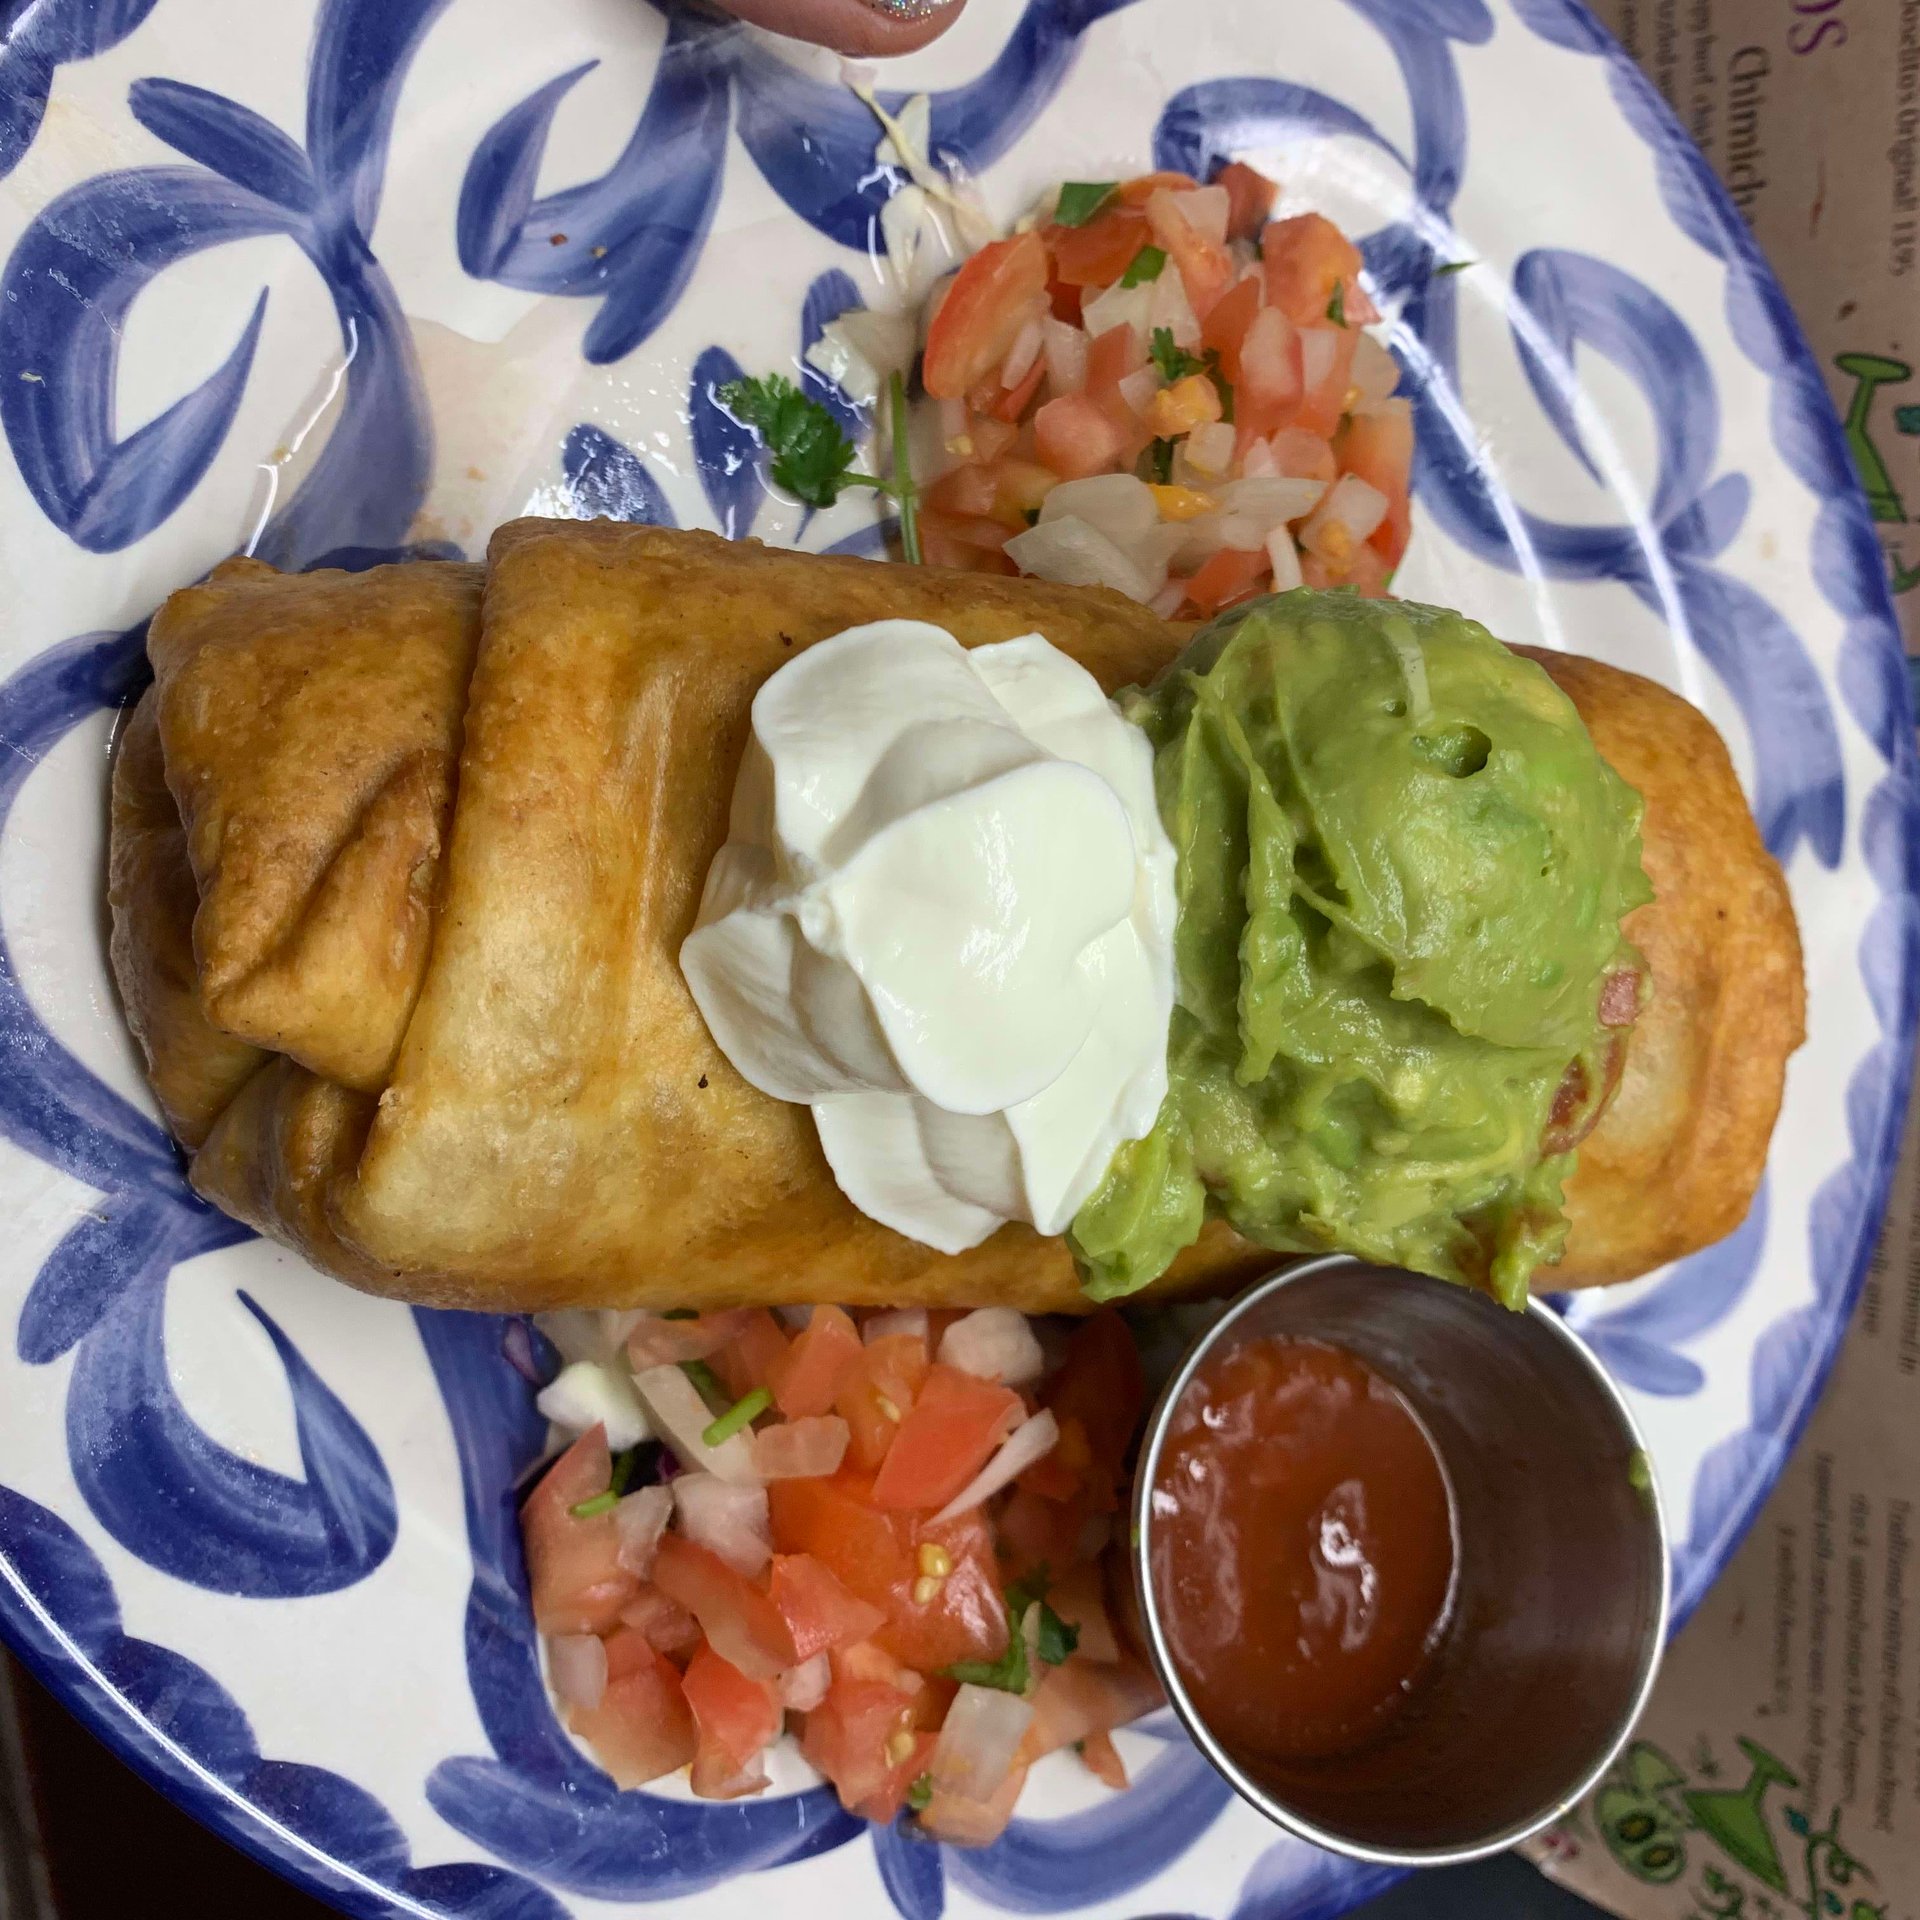 Best Chimichangas Ever - Comfortable Food